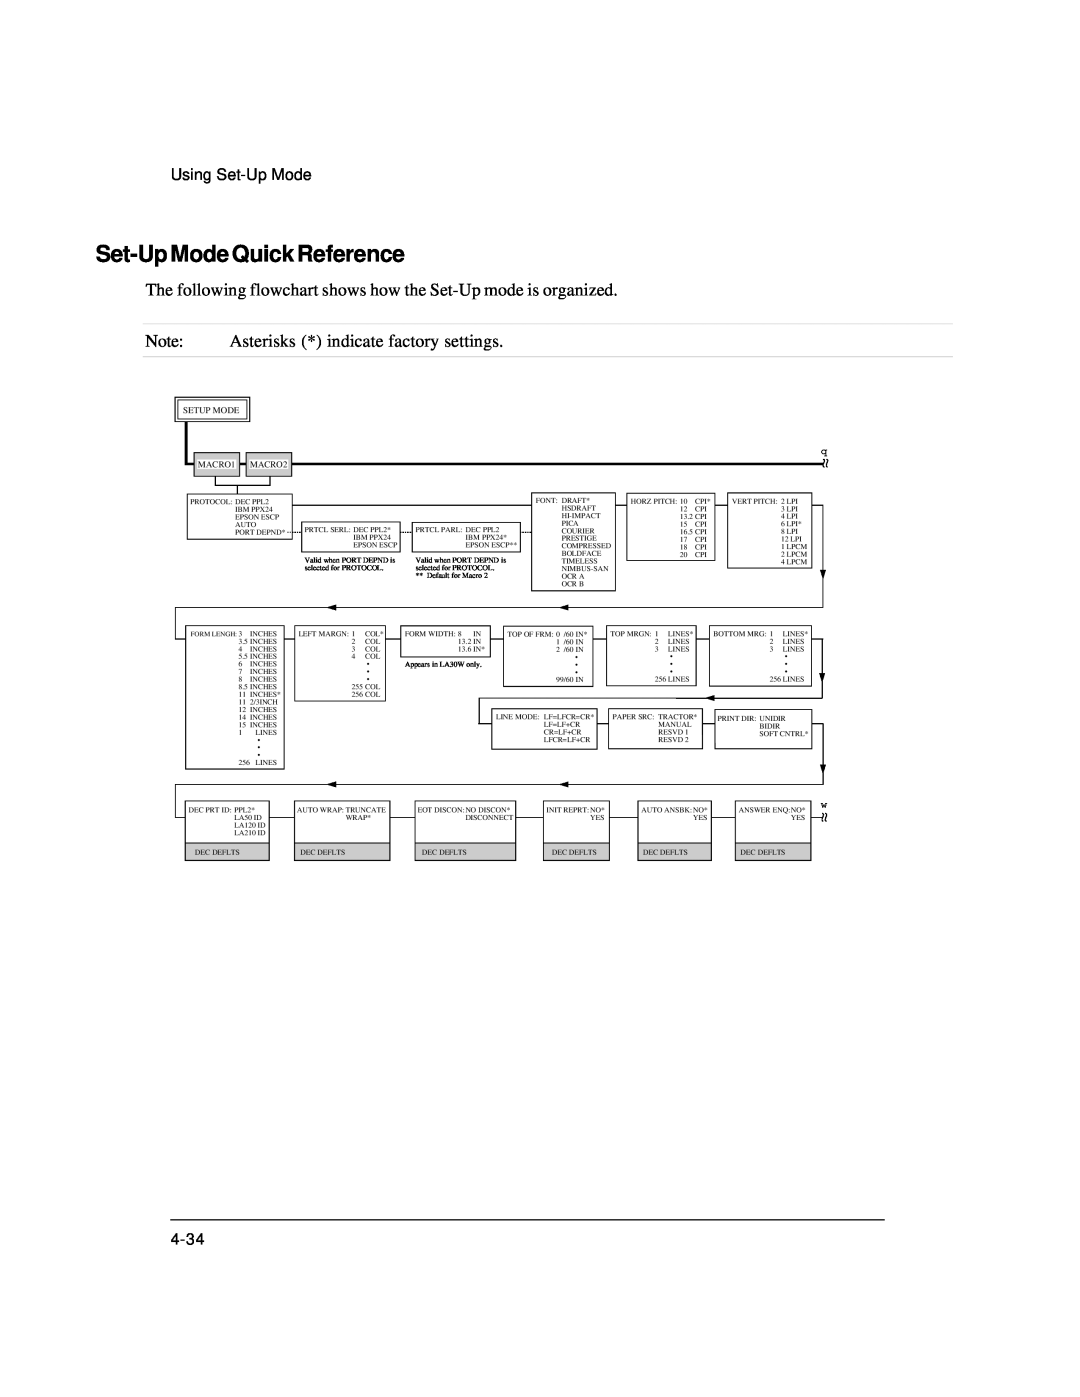 Genicom LA36 manual Set-Up Mode Quick Reference, The following flowchart shows how the Set-Up mode is organized 